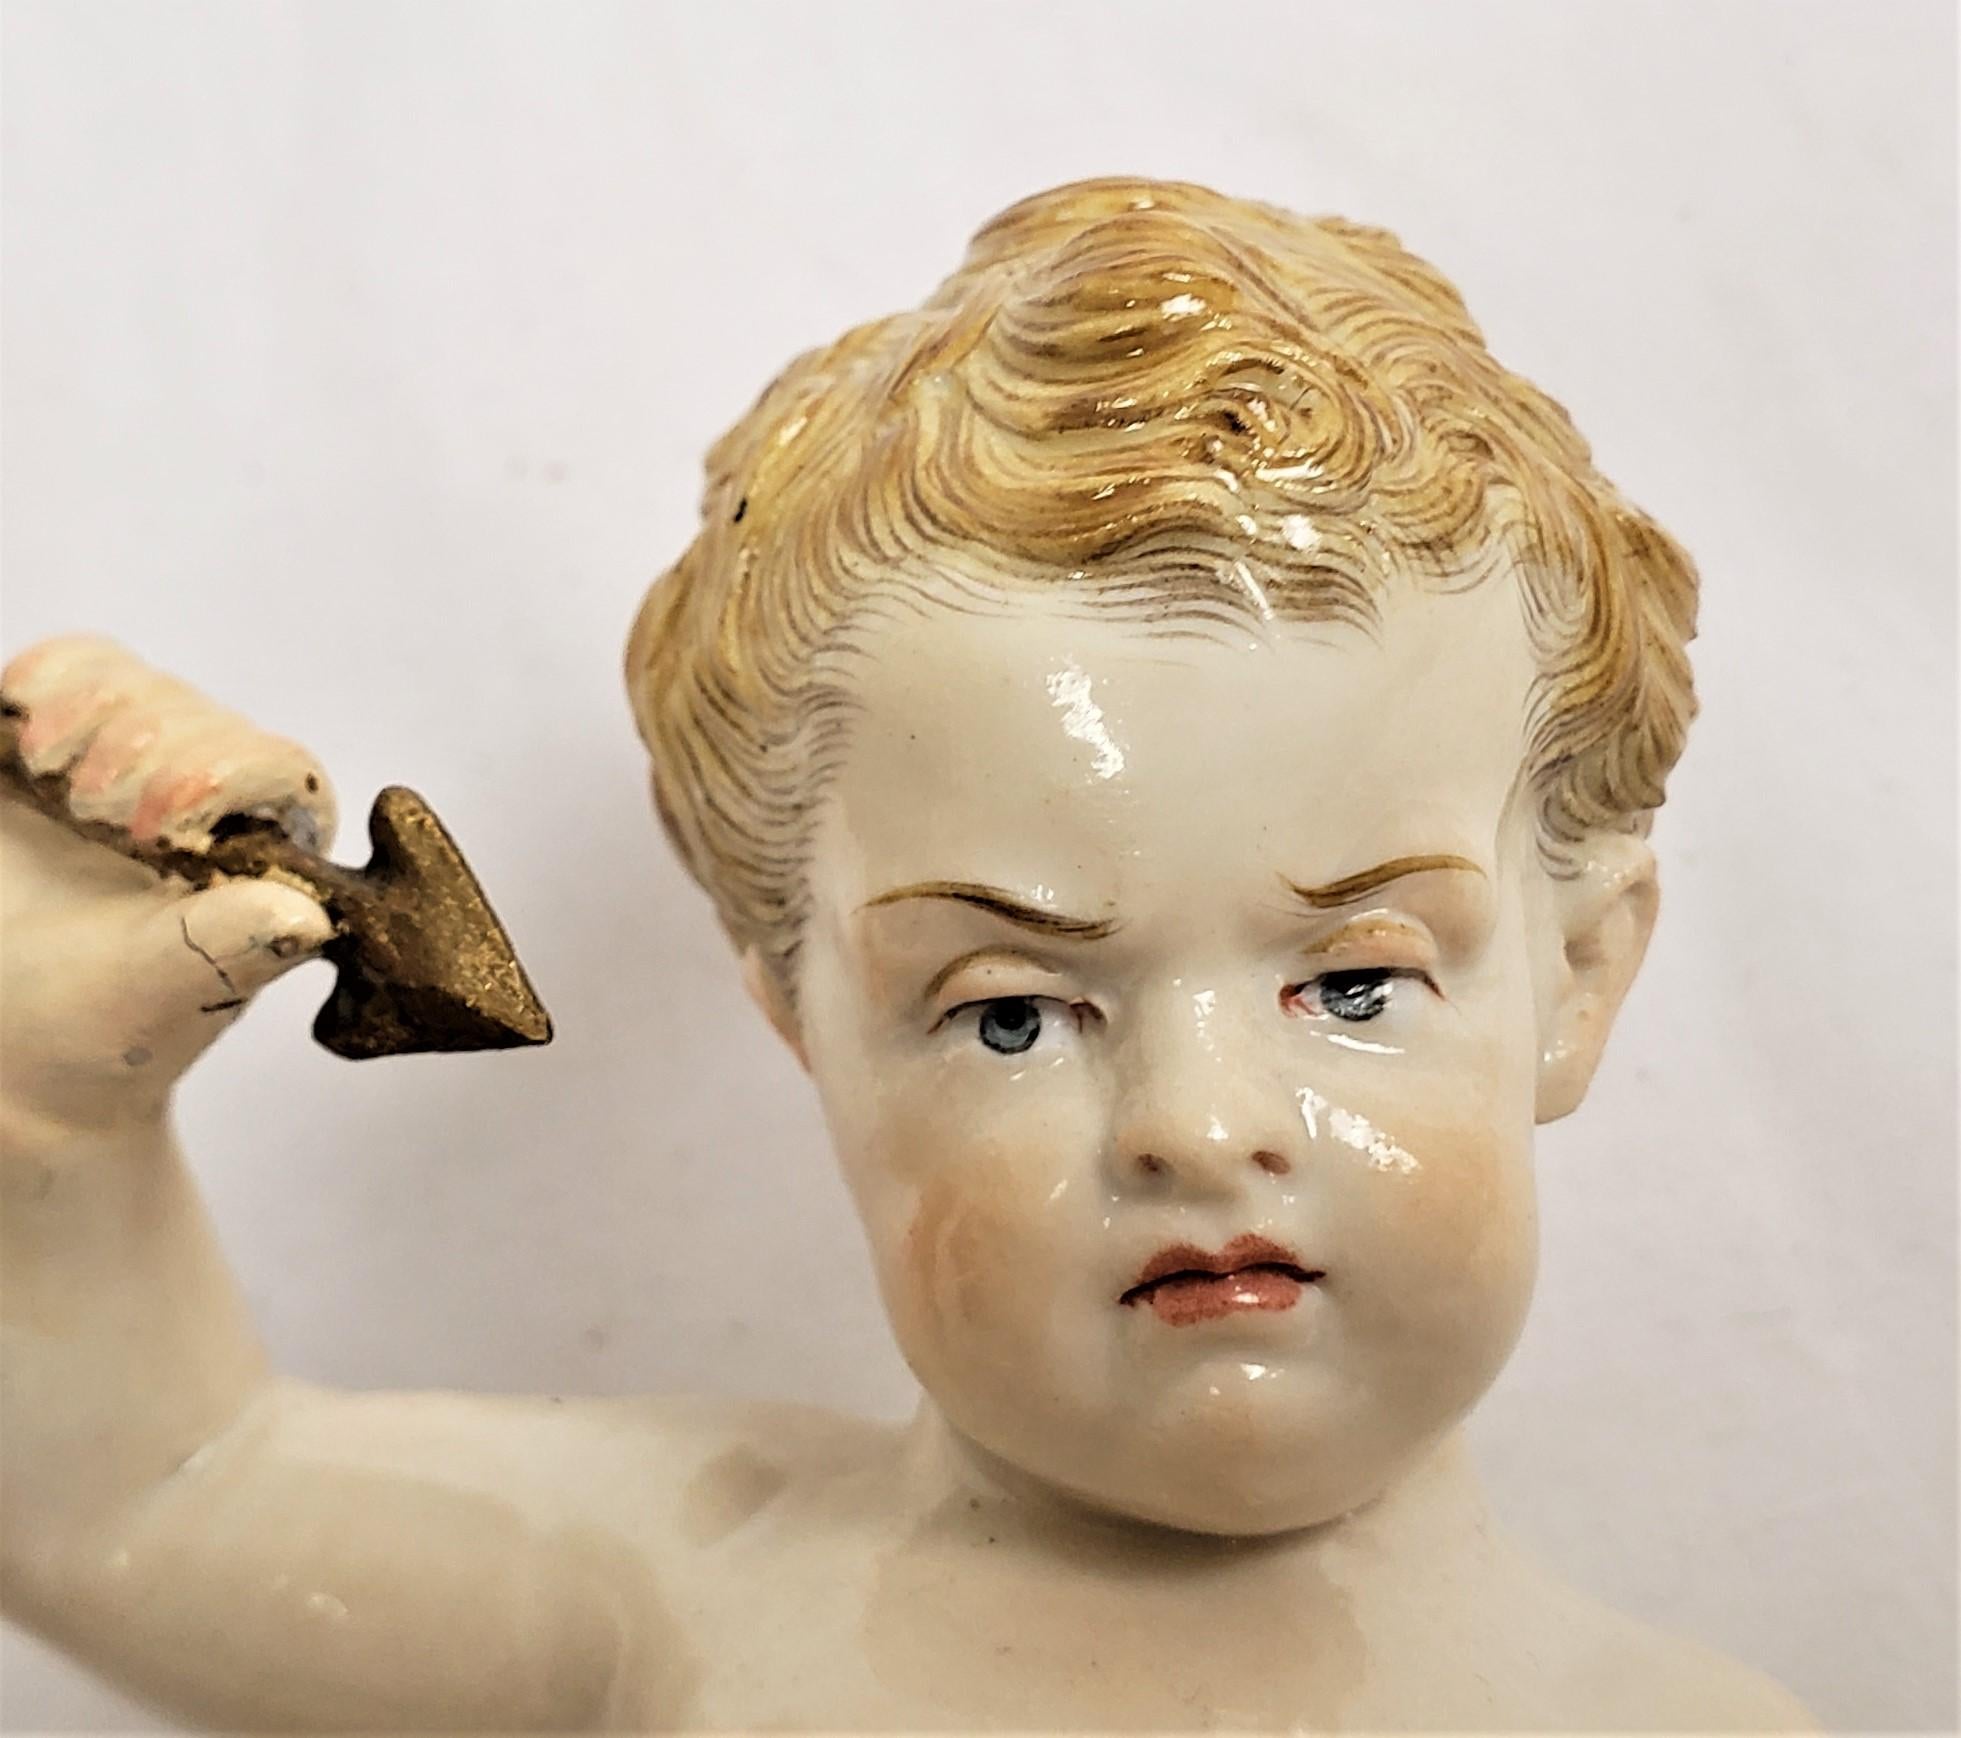 Antique Meissen Porcelain Figurine of Cupid Holding an Arrow & Flaming Heart For Sale 2